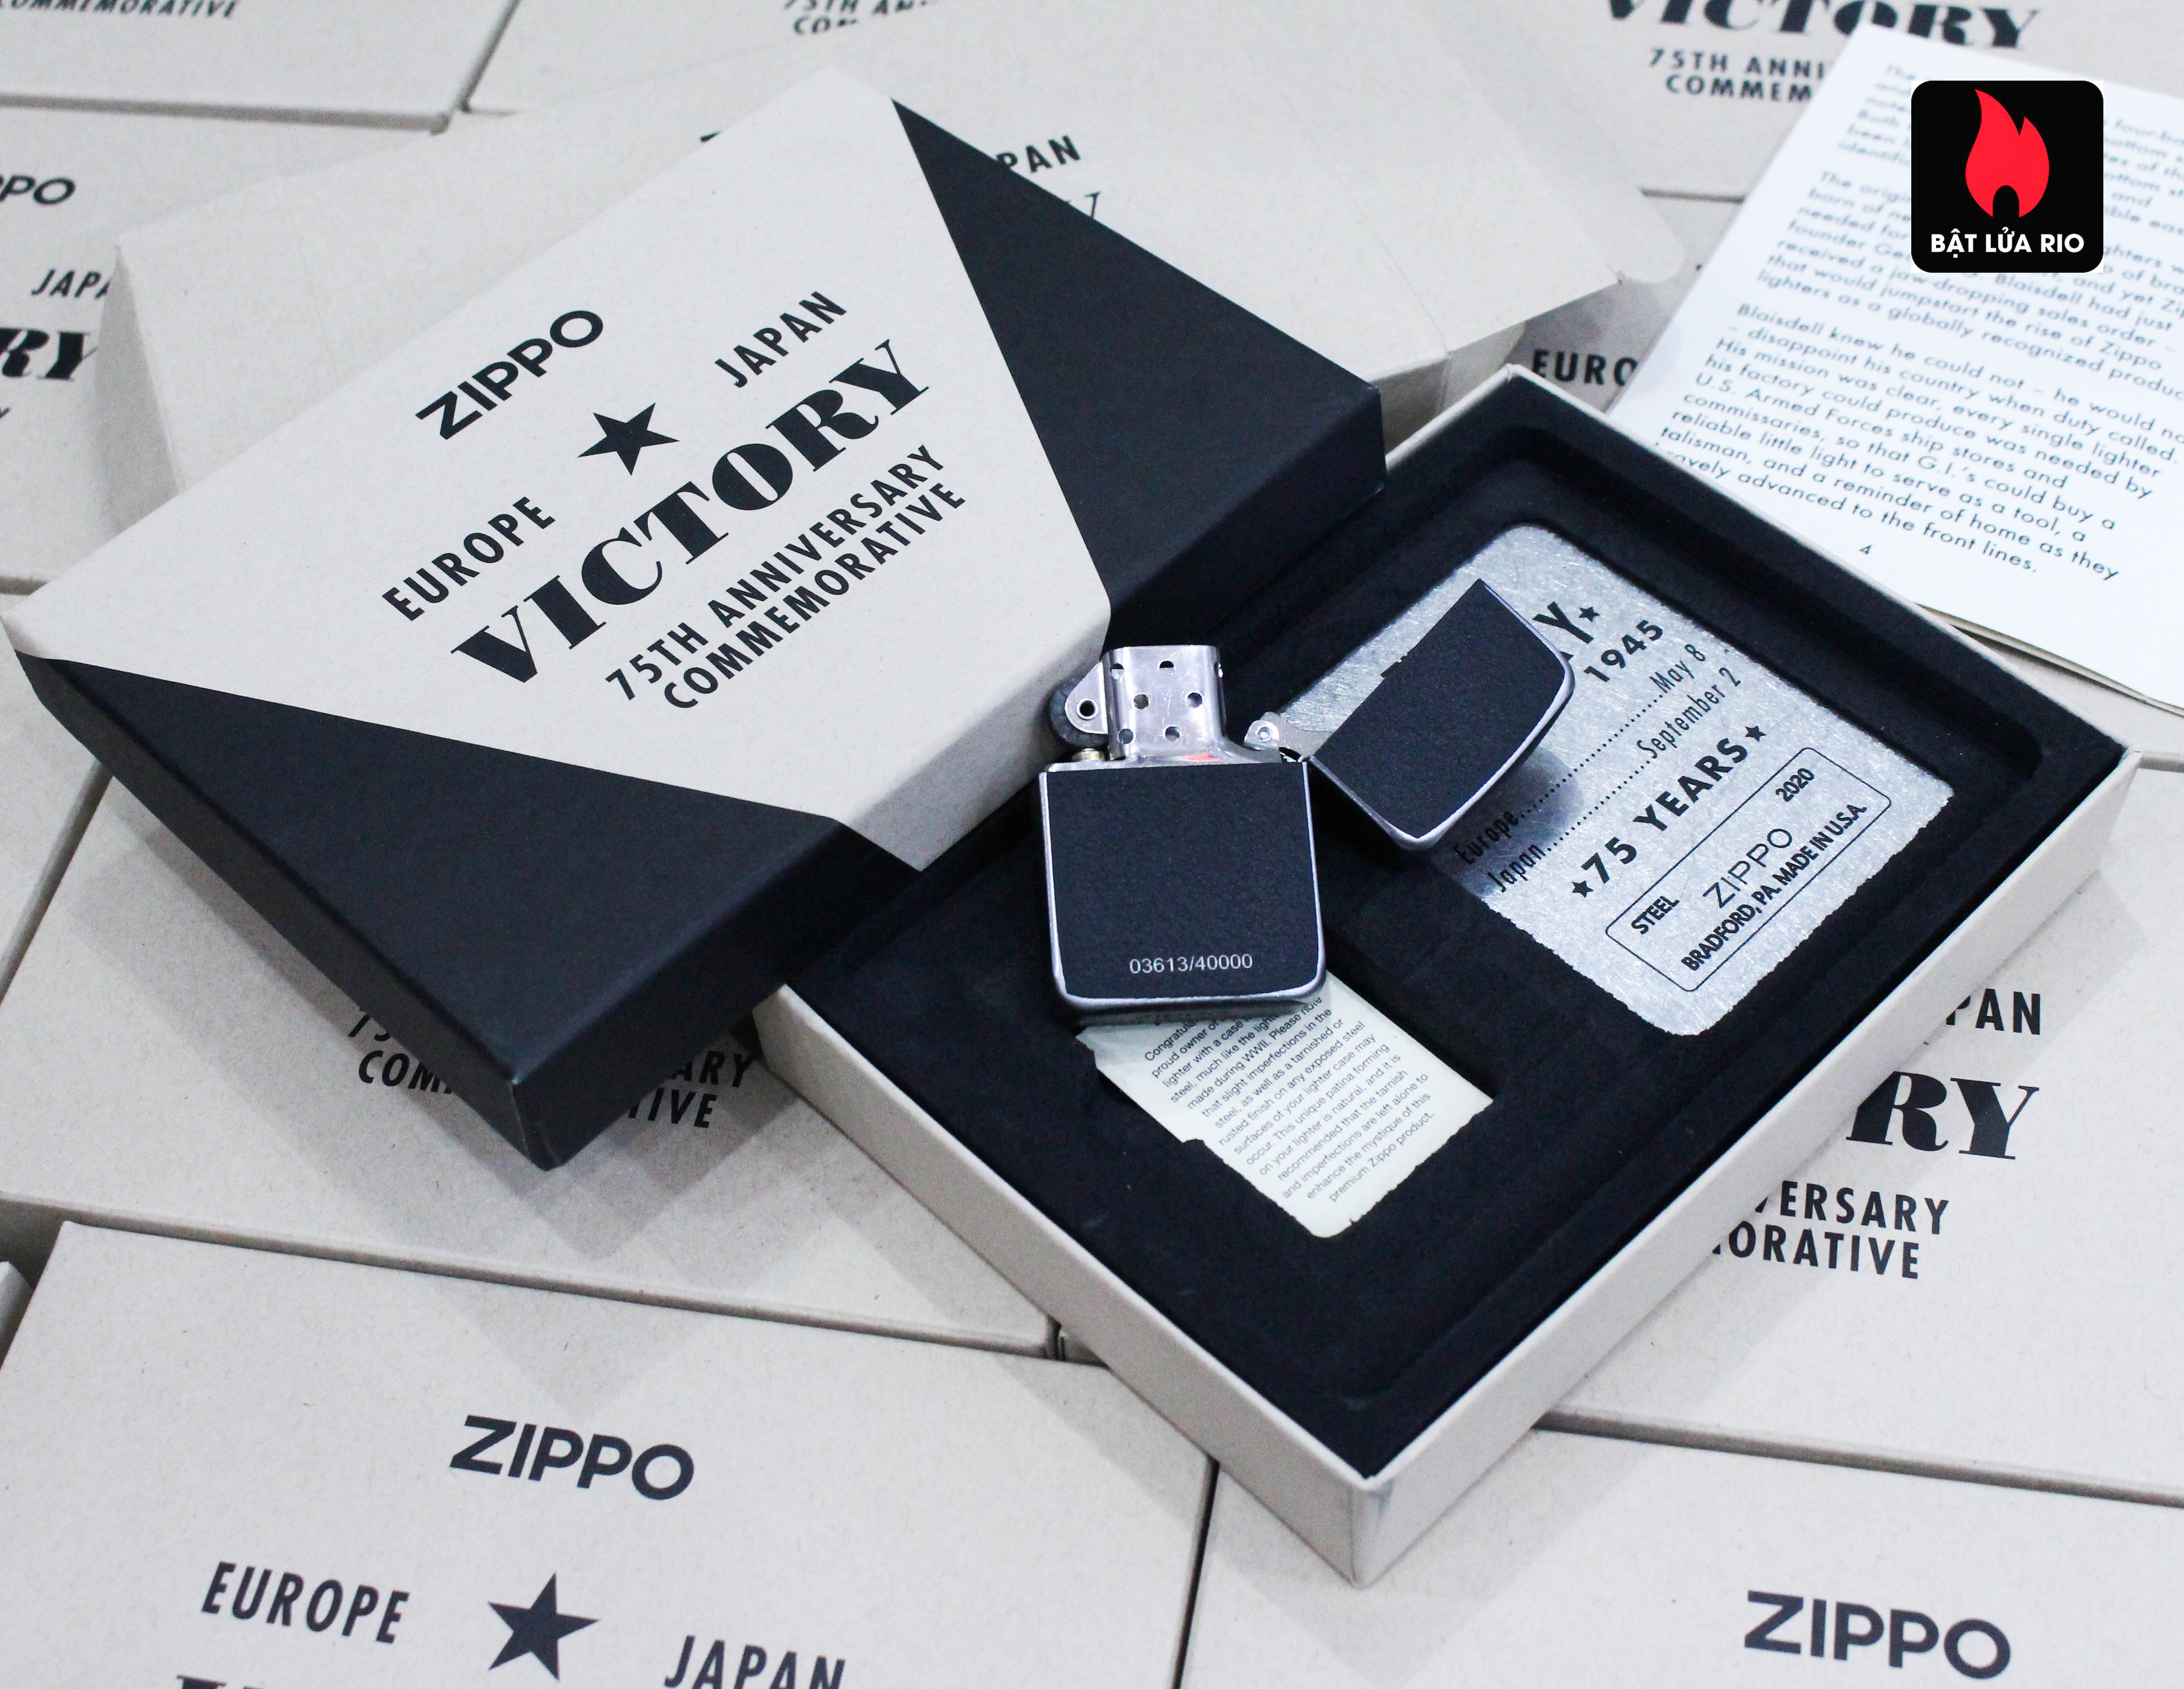 Zippo VE/VJ 75th Anniversary Collectible Steel Case - Zippo Victory in Europe & Japan Collectible Lighter - Zippo 49264 46